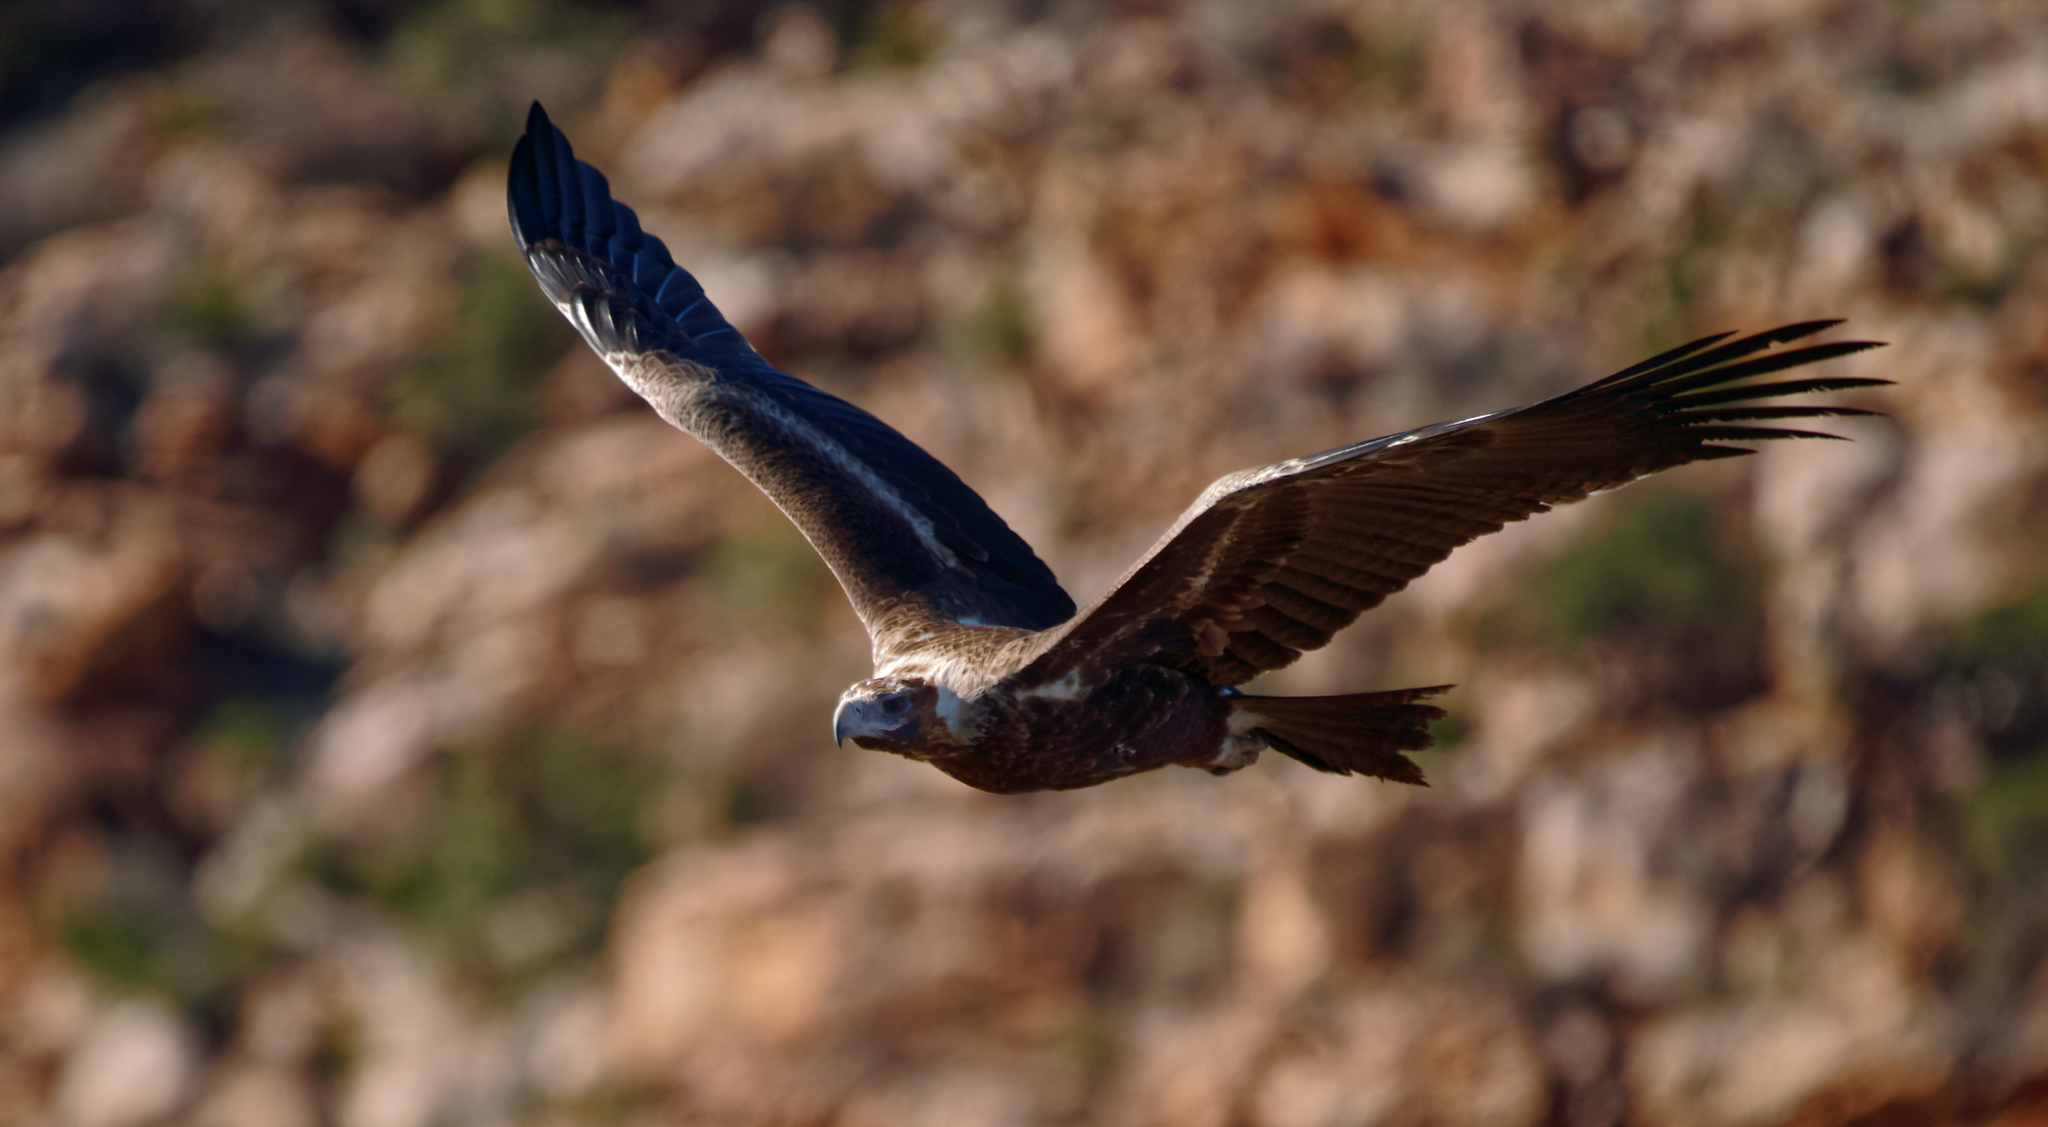 Wedge-tailed Eagle in gorge IF (28).jpg